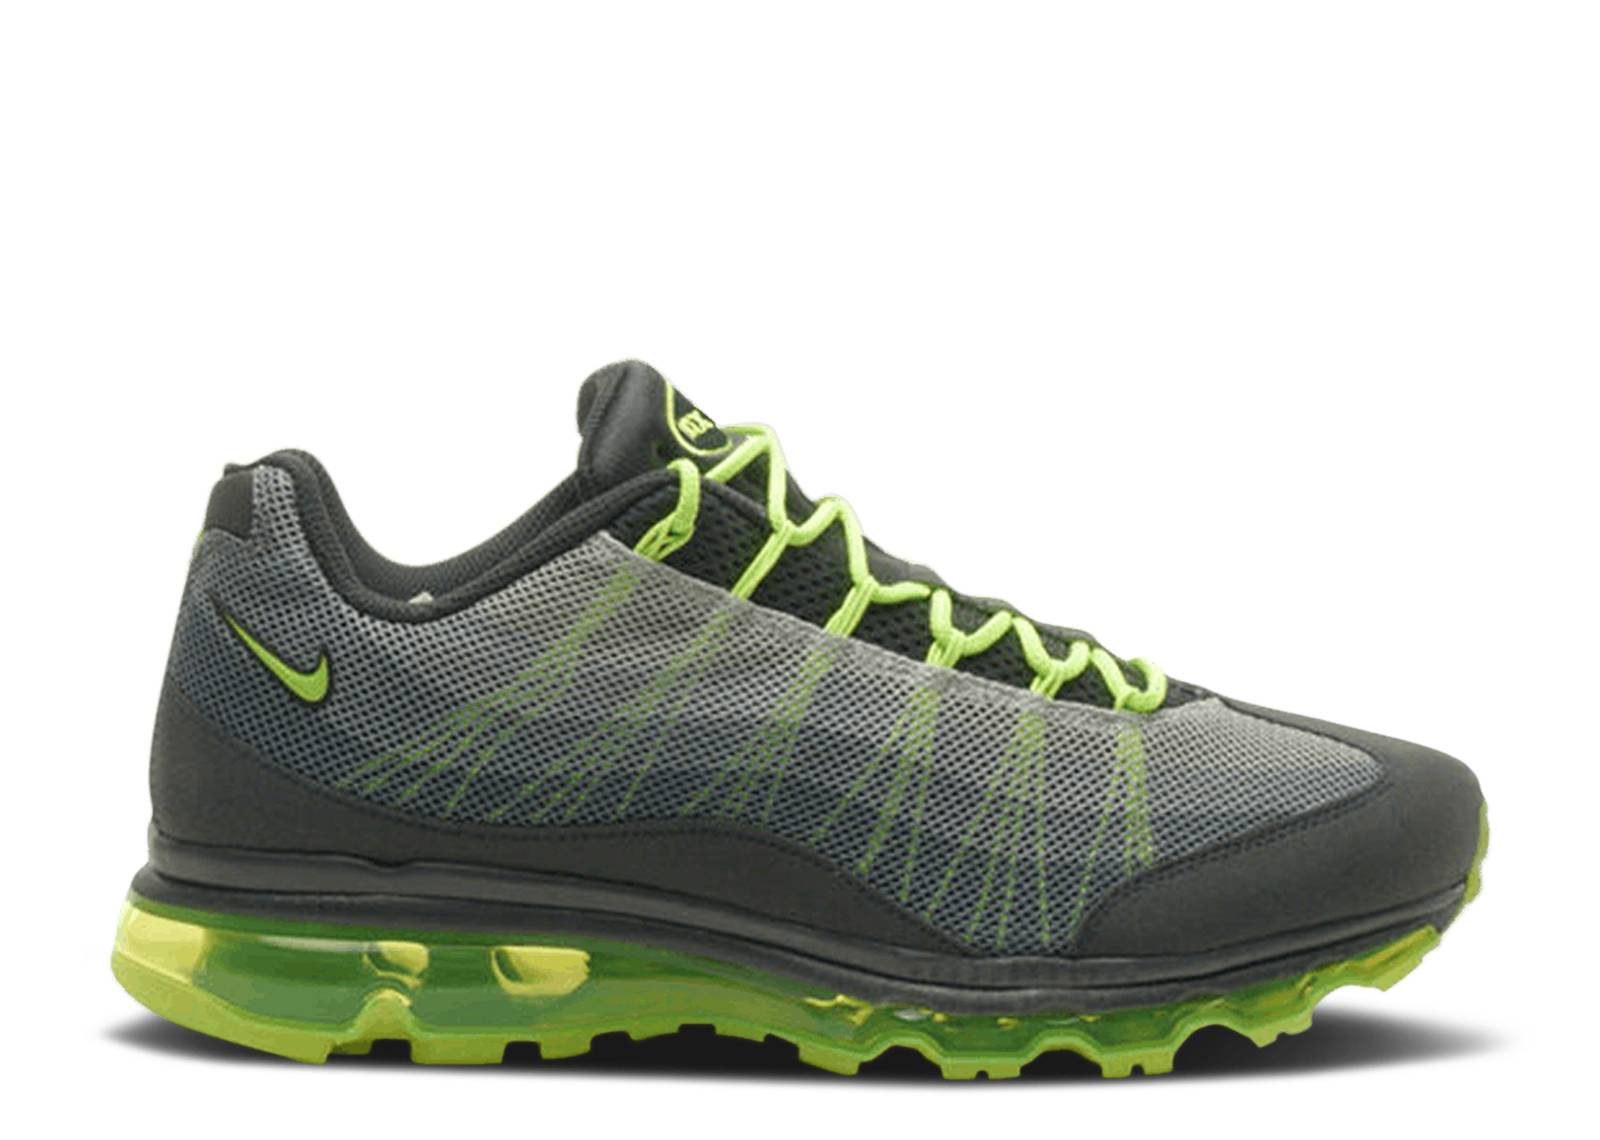 Air Max 95 Dynamic Flywire 'Anthracite Volt'